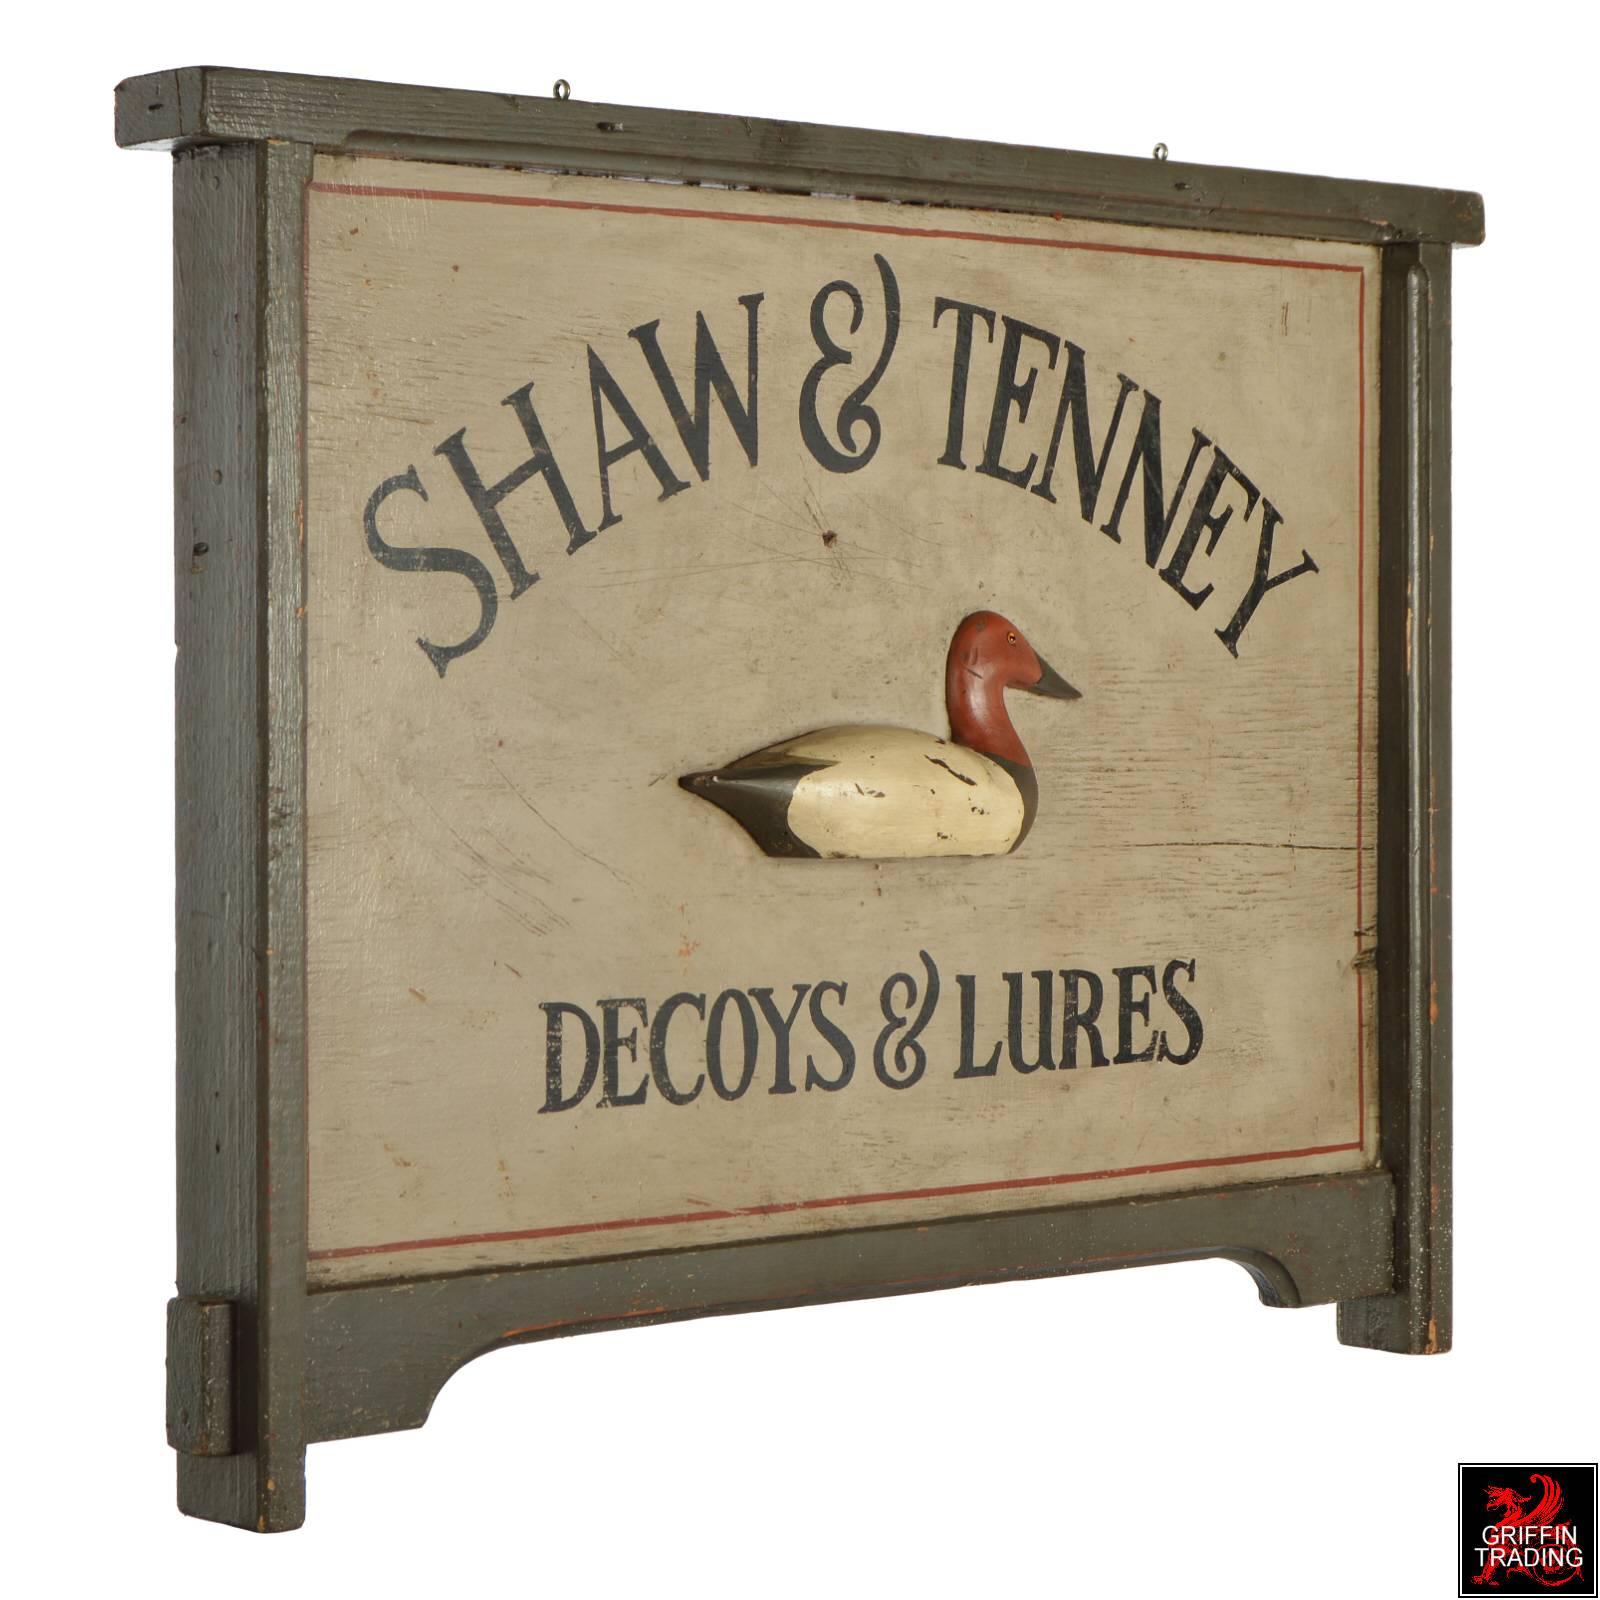 Hand-Carved Shaw and Tenney Decoys and Lures Trade Sign For Sale